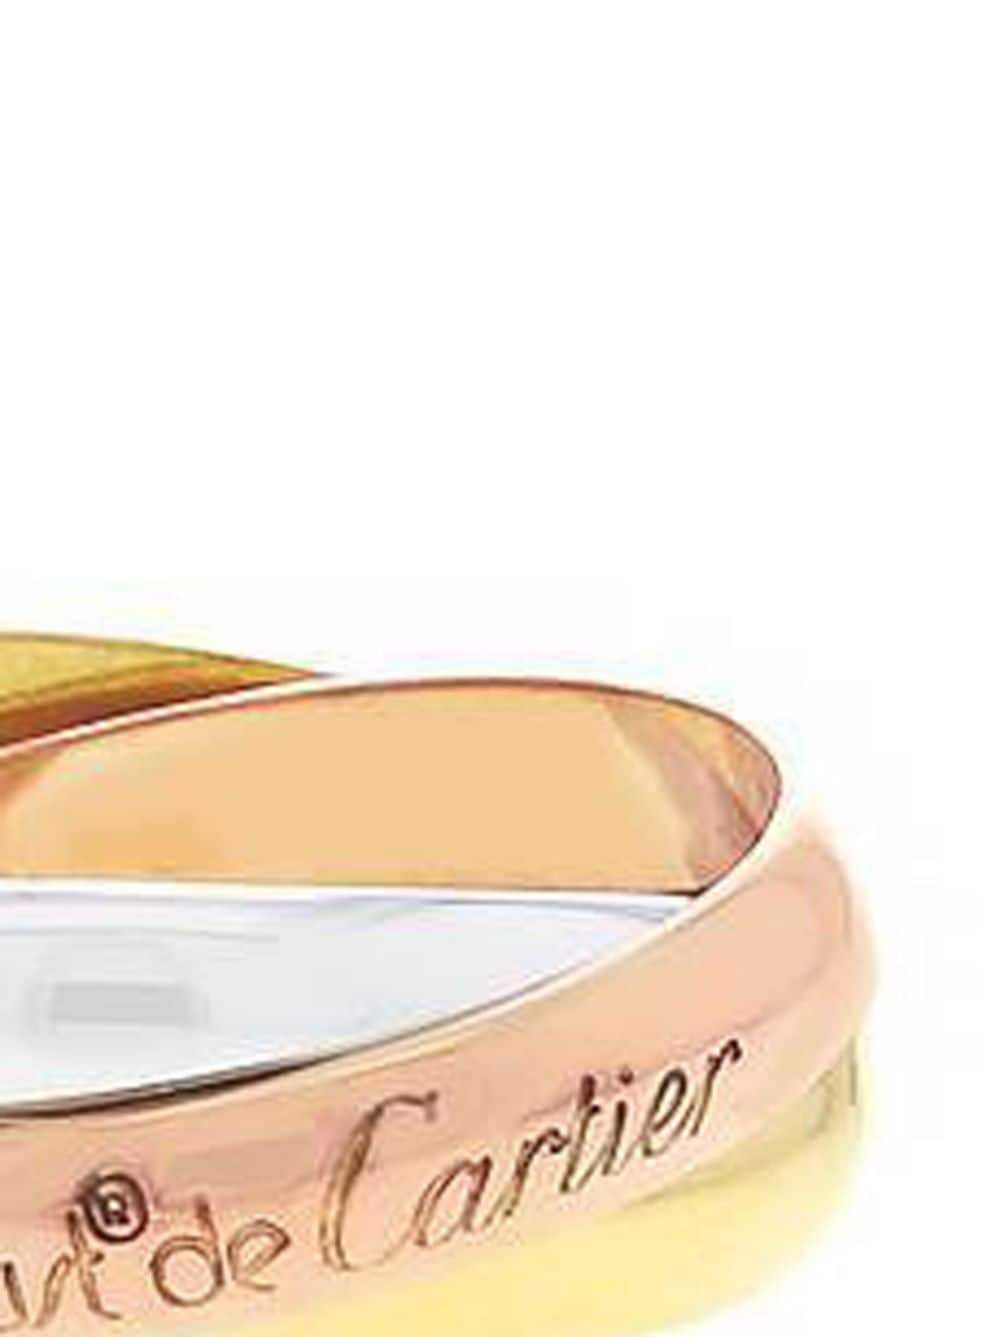 Cartier 1990 pre-owned 18kt gold Trinity ring - image 2